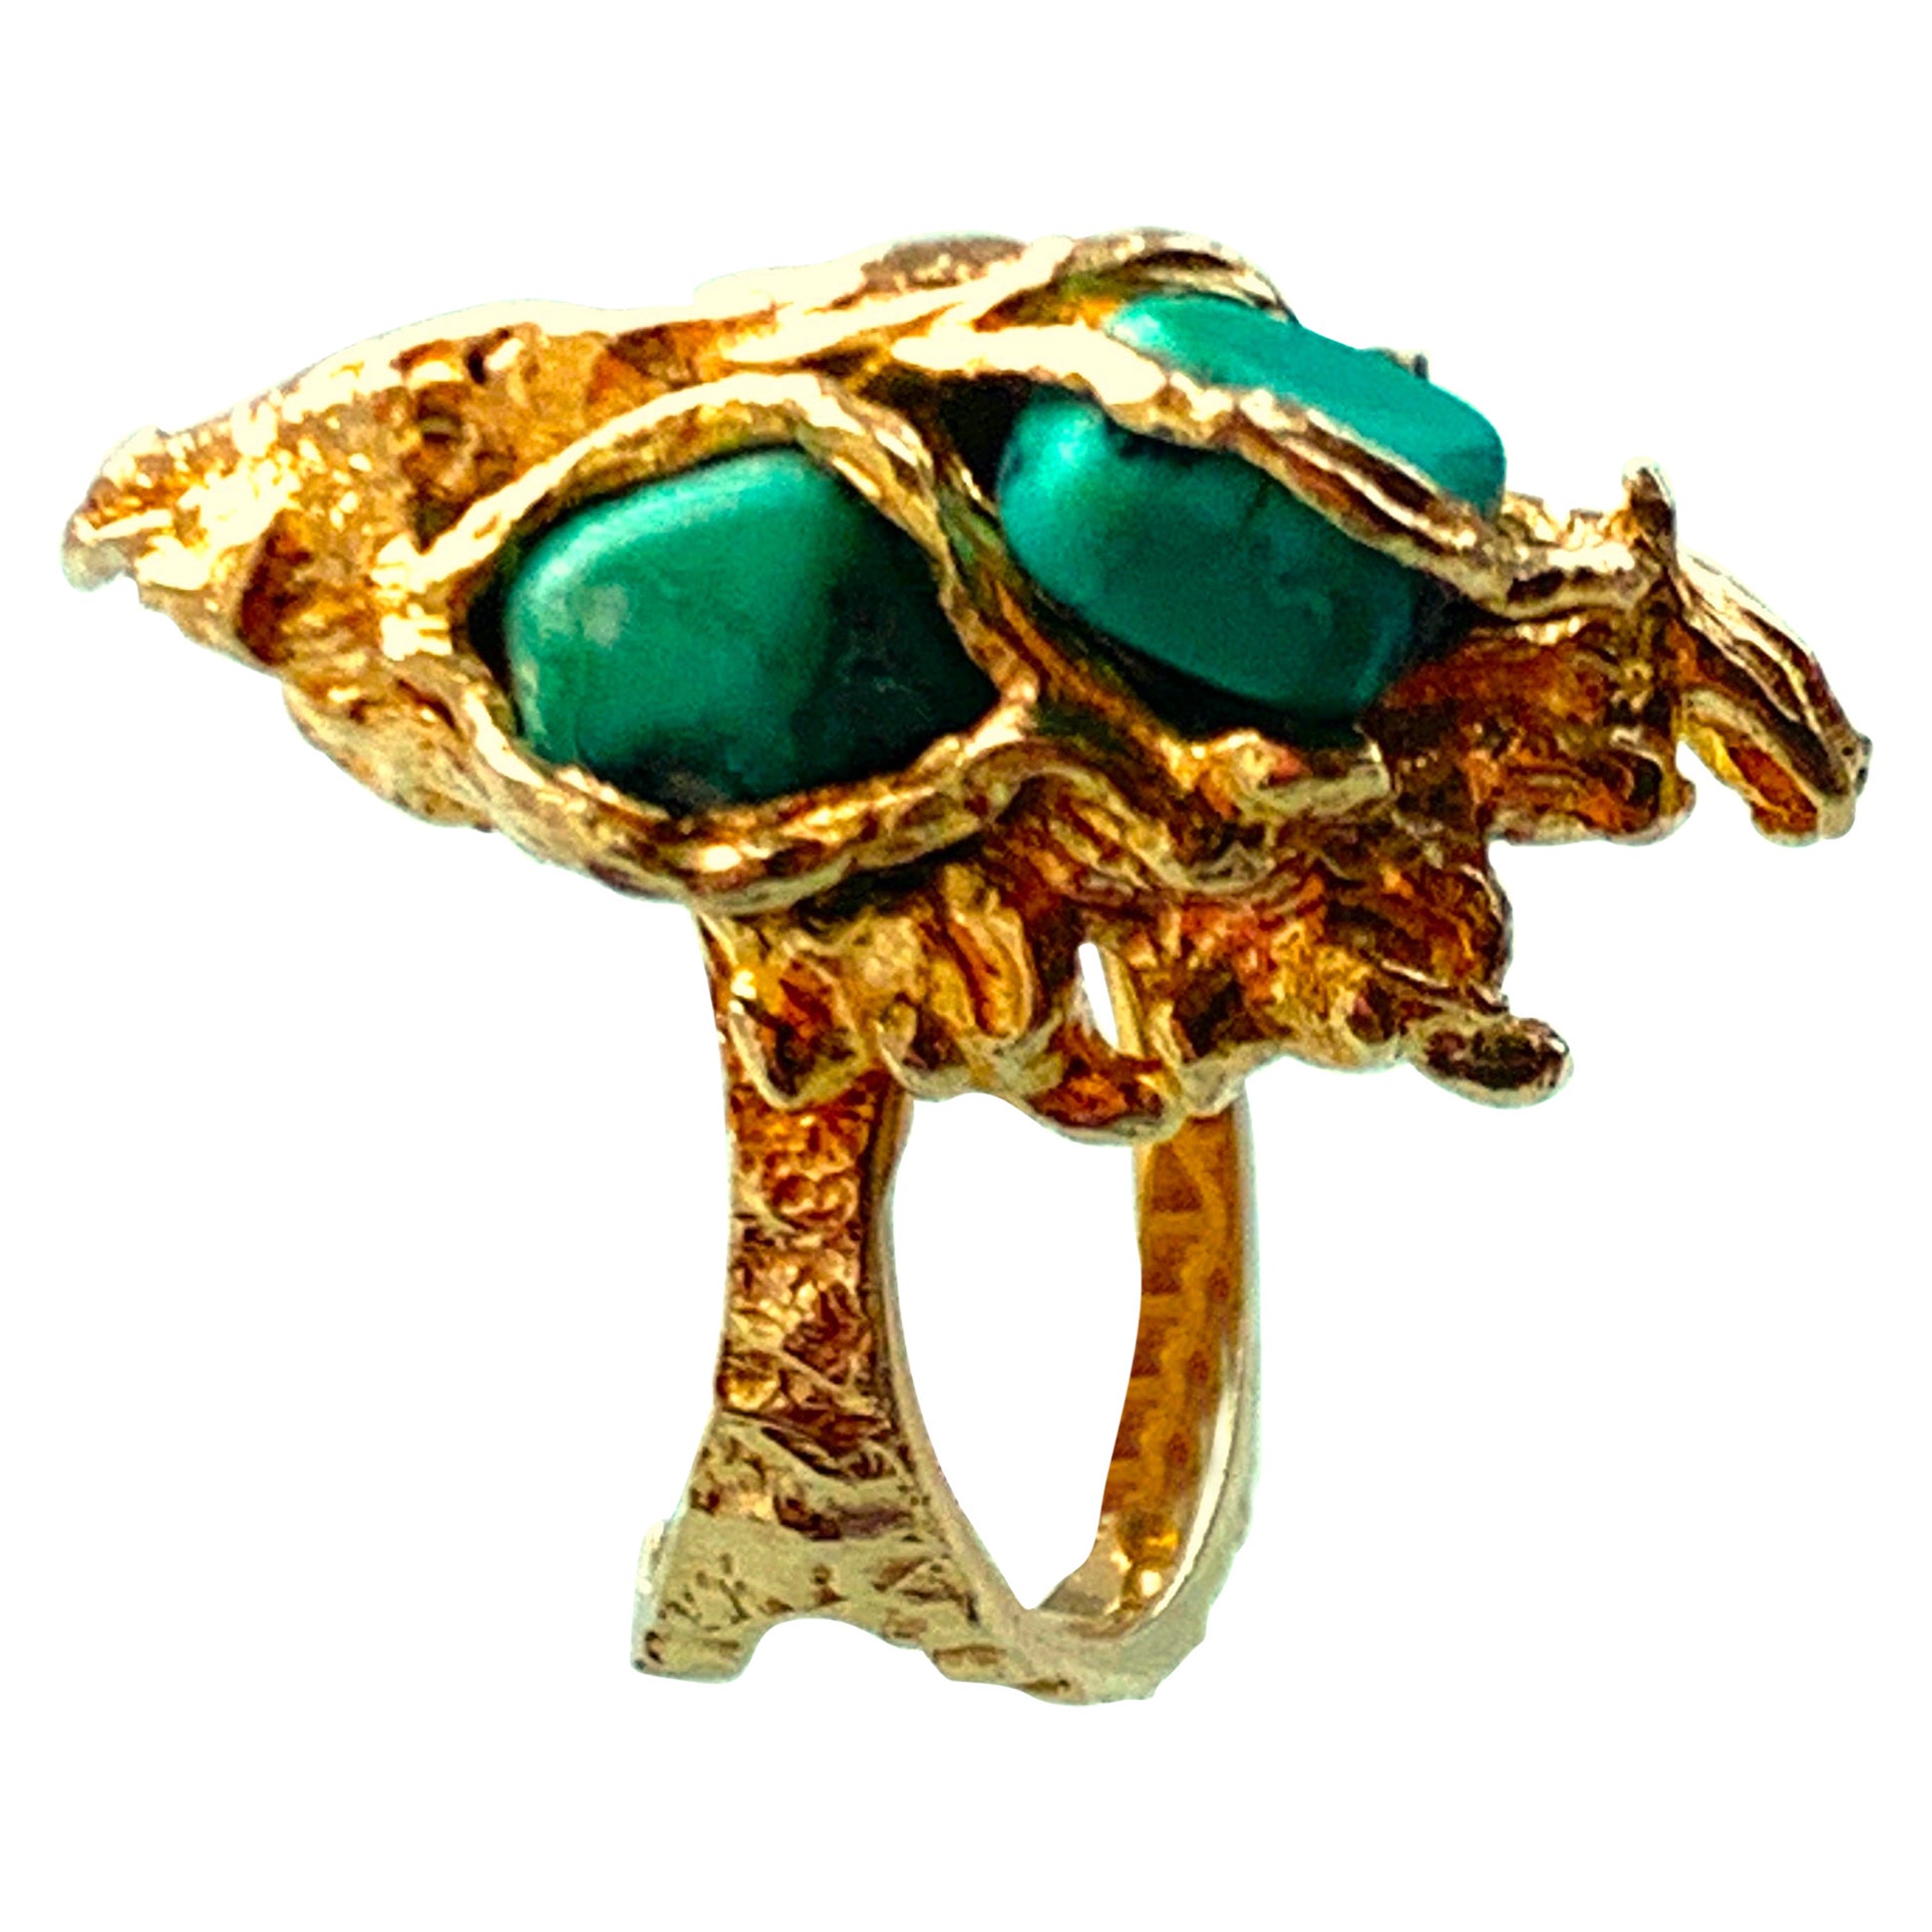  9ct Gold & Turquoise Brutalist Ring